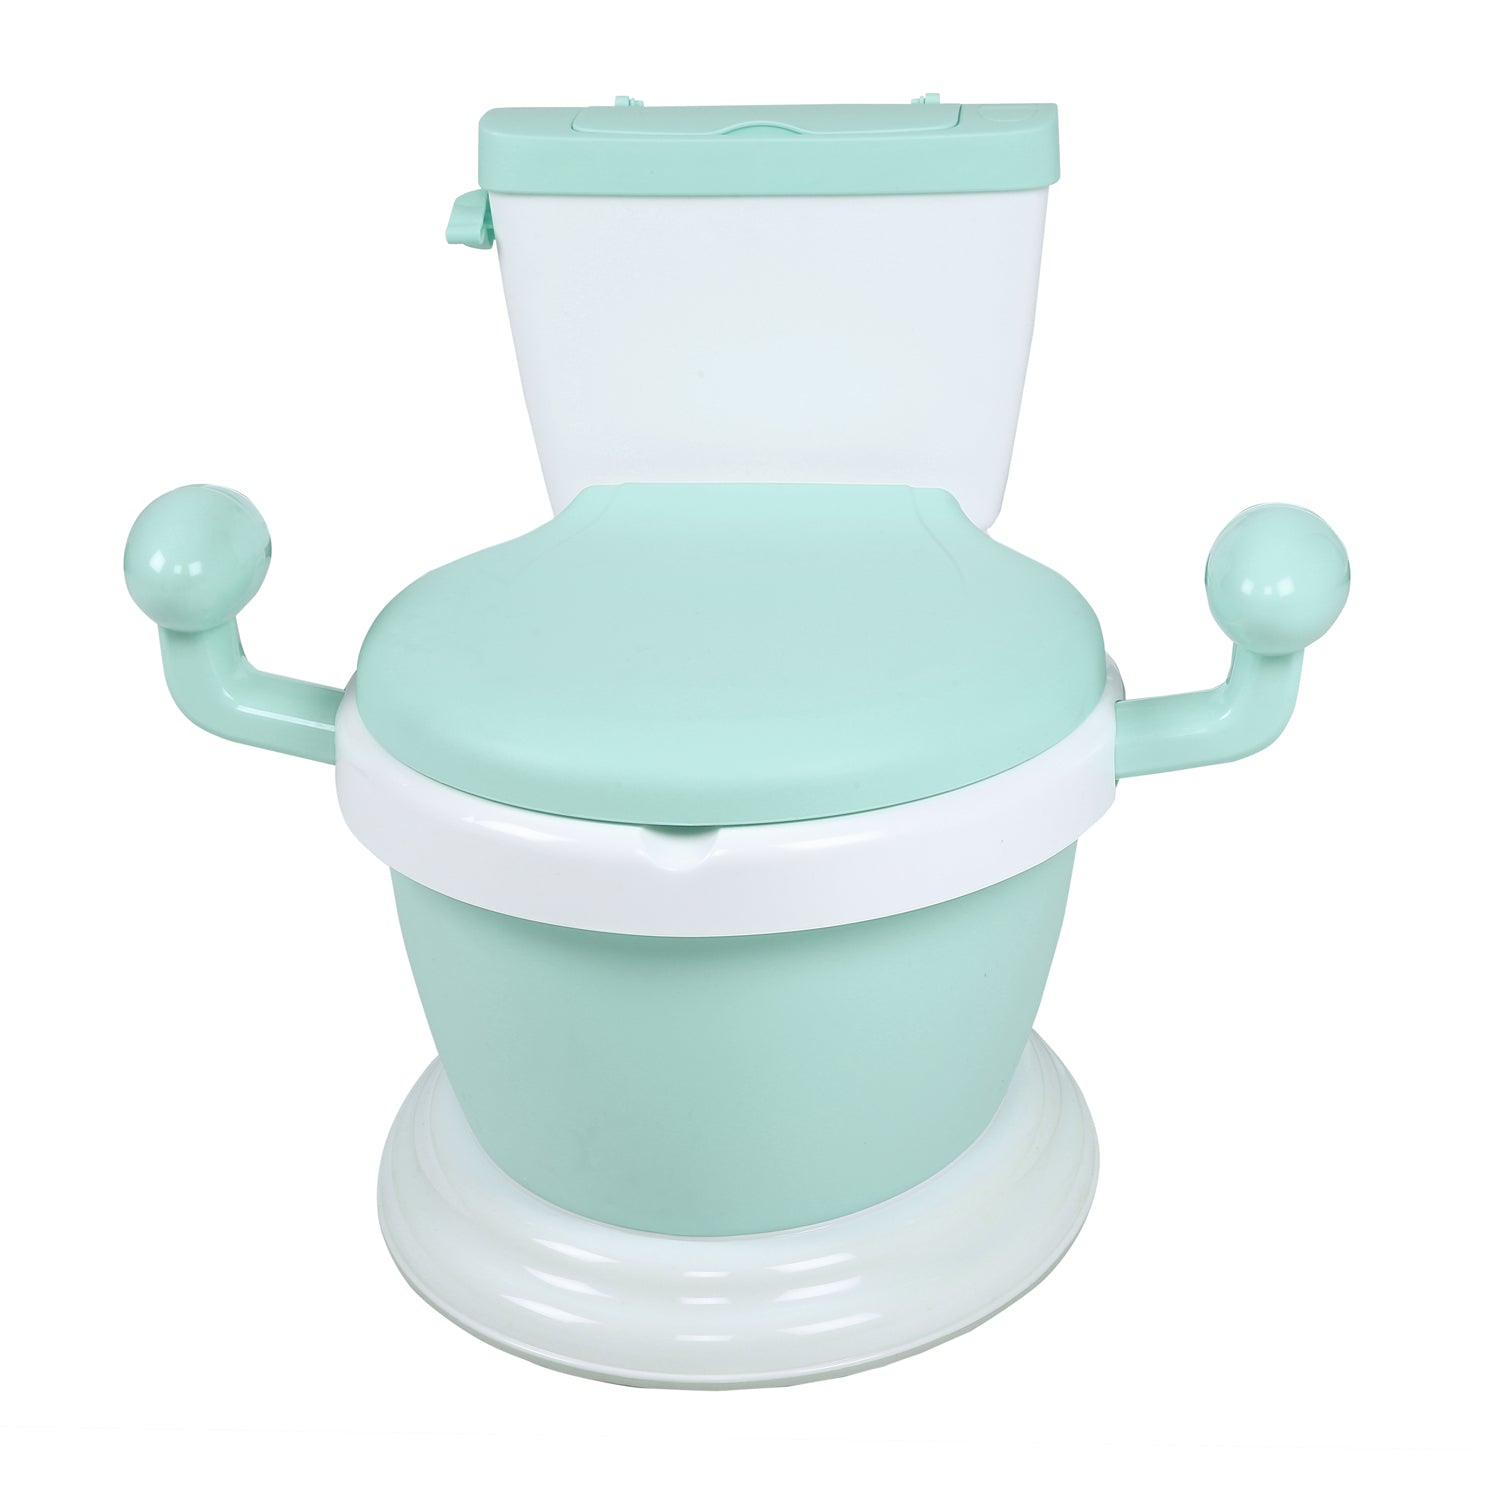 Mint Green Potty Chair with a comfortable seat, handles for support - Baby Moo